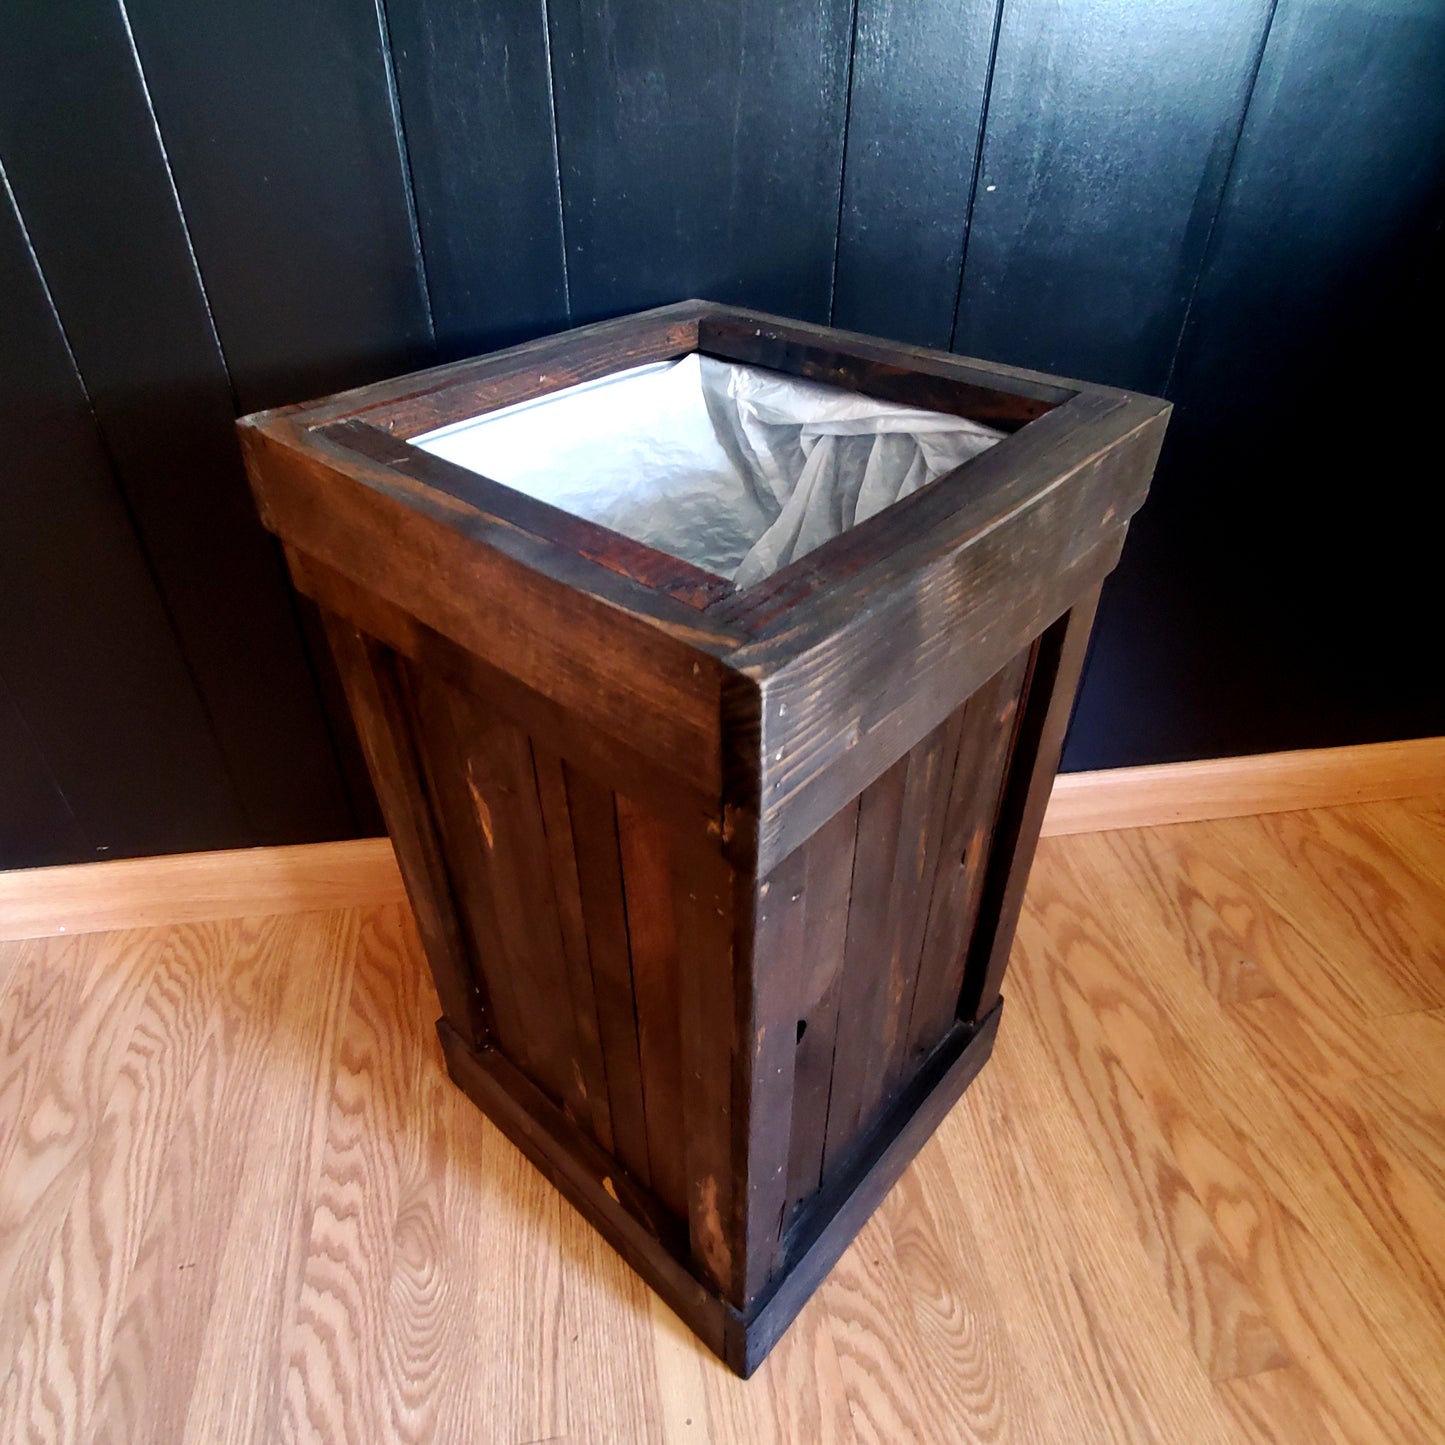 Wood Garbage Can